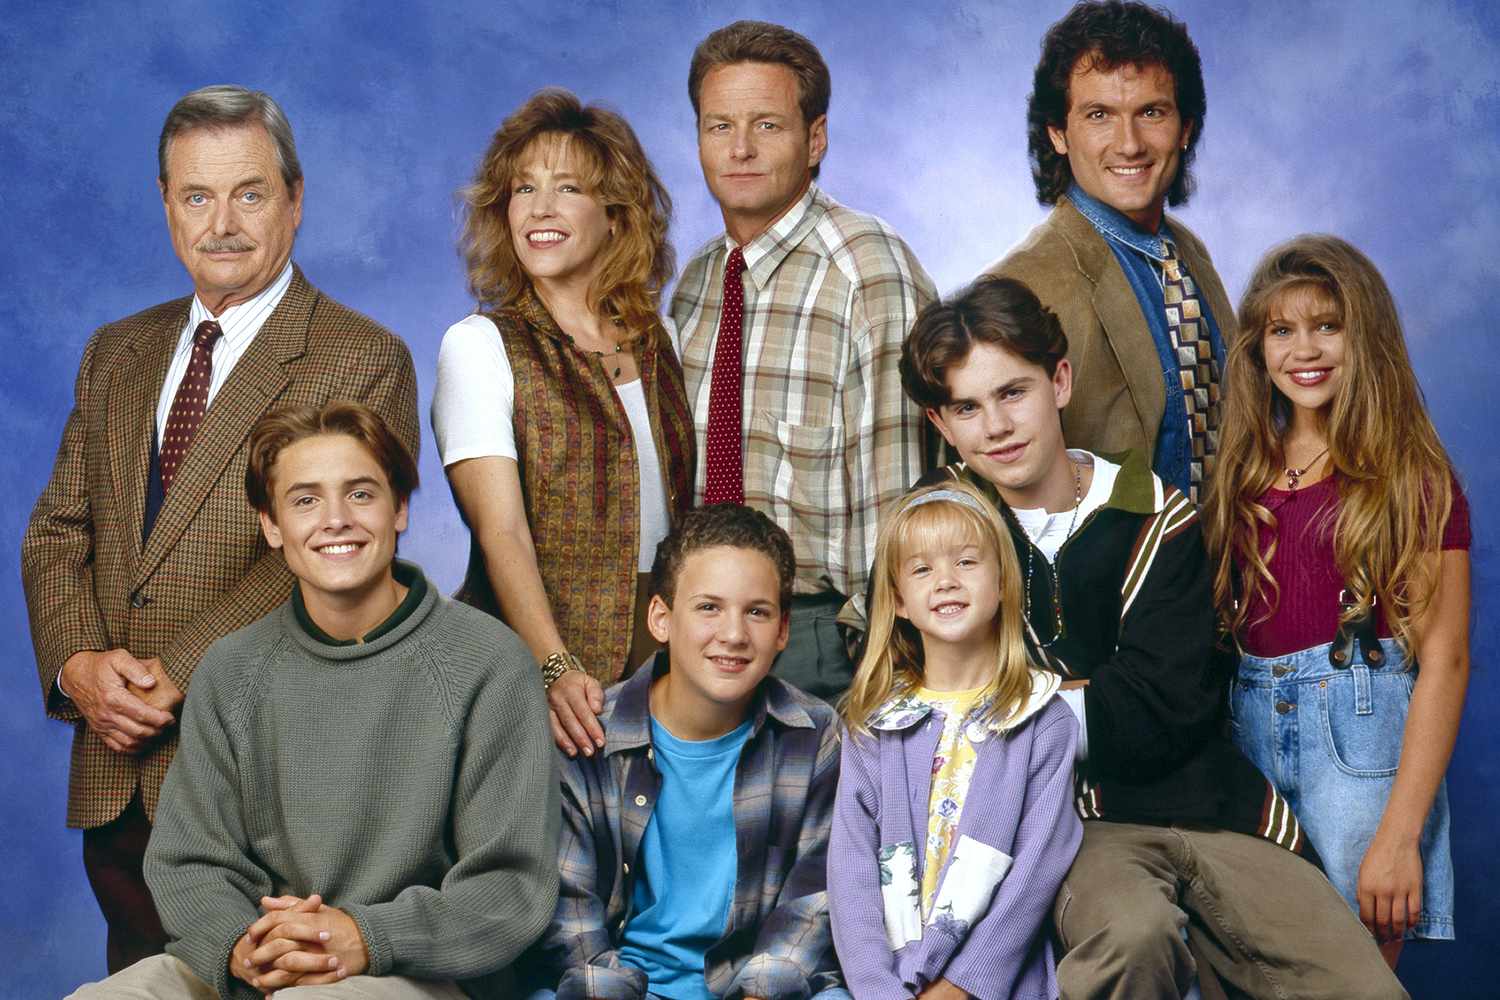 The cast of 'Boy Meets World'